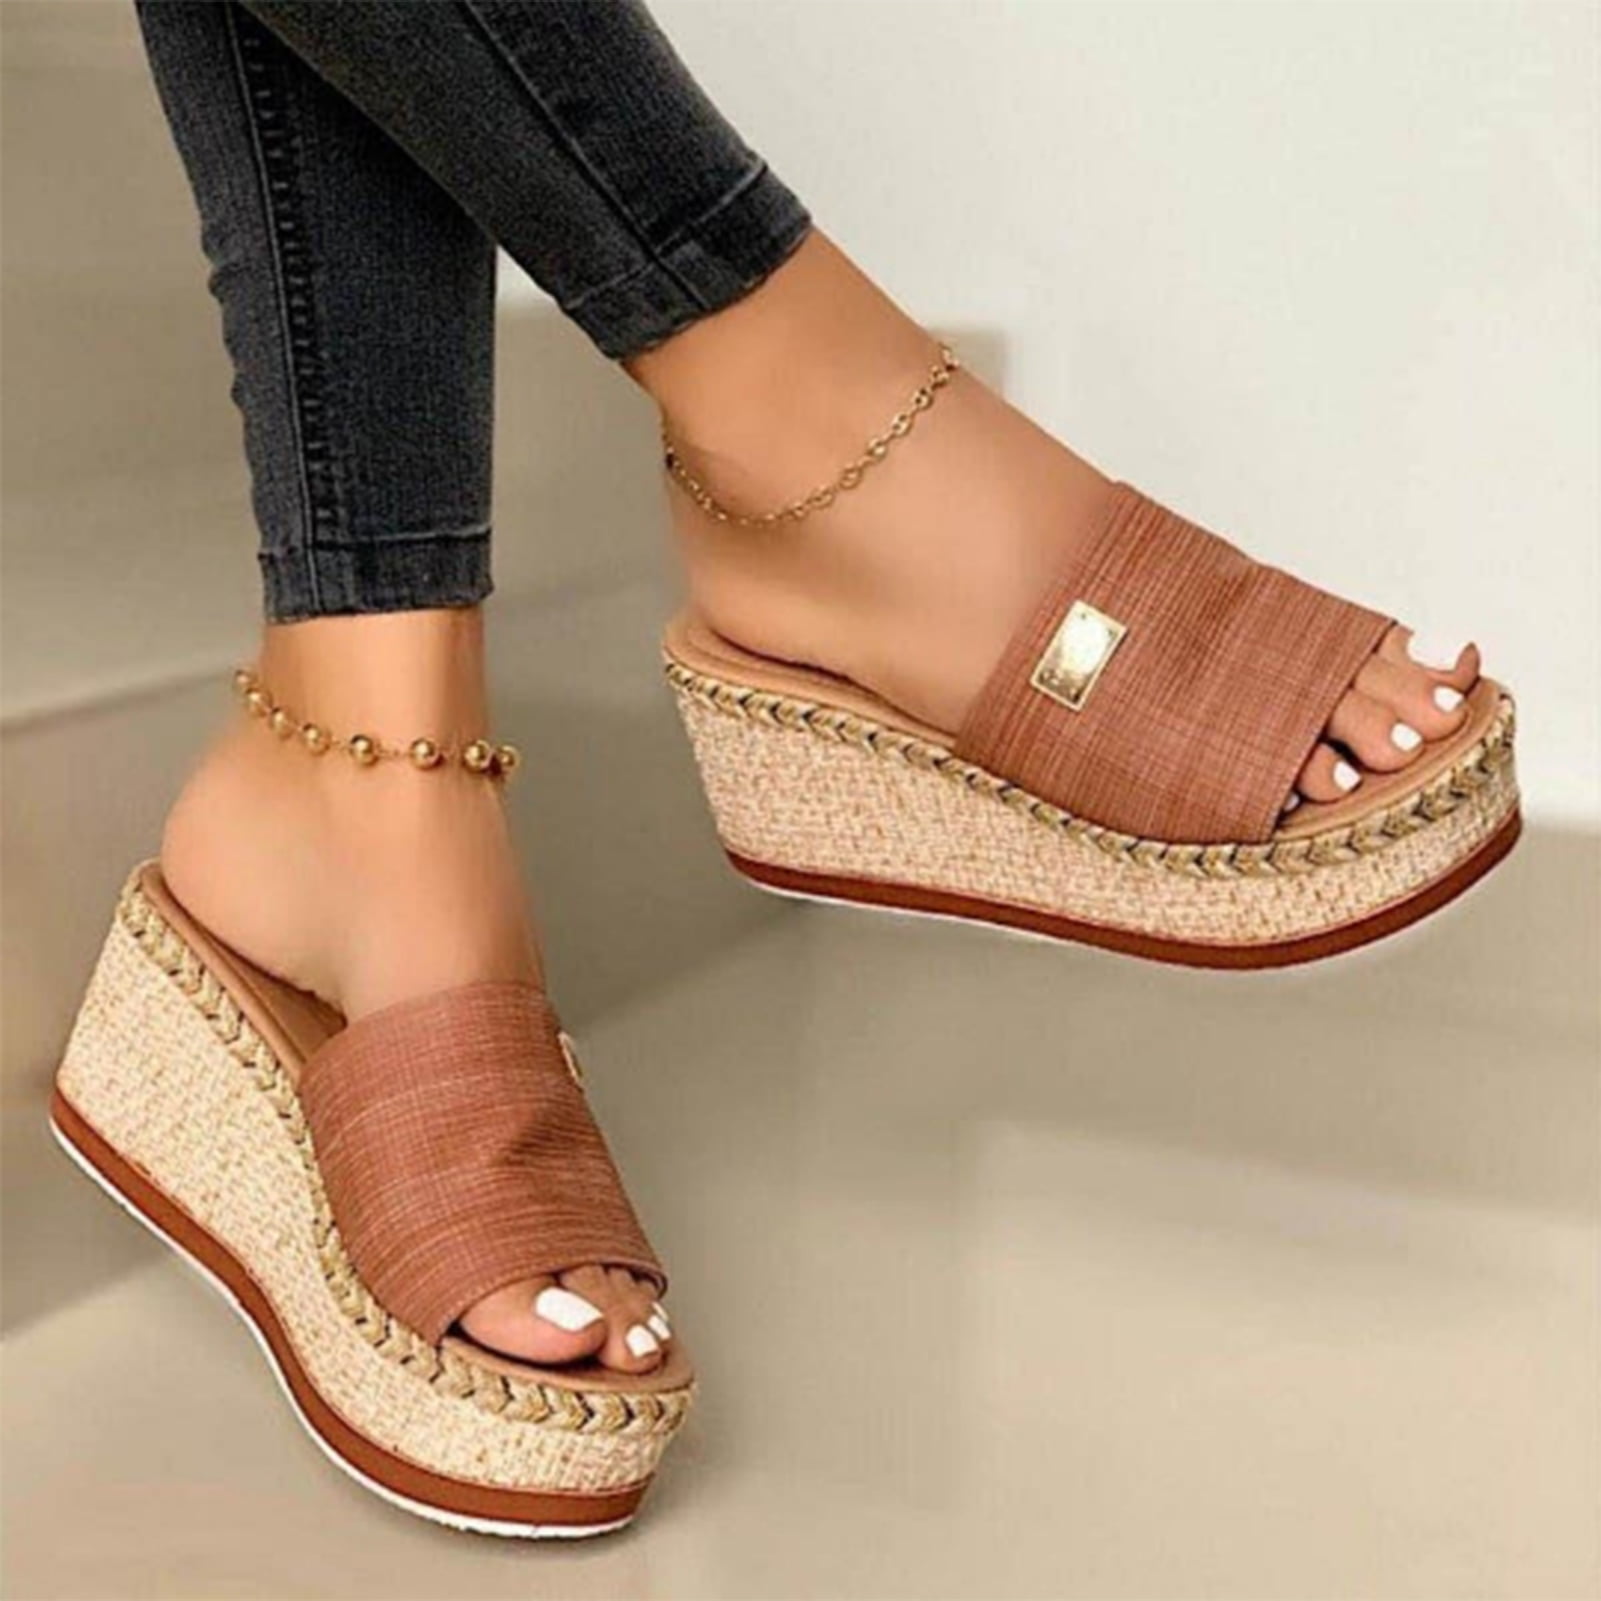 Details about   Ladies Middle Heel Platform Sandals Women Wedges  Open Toe Chunky Summer Shoes 